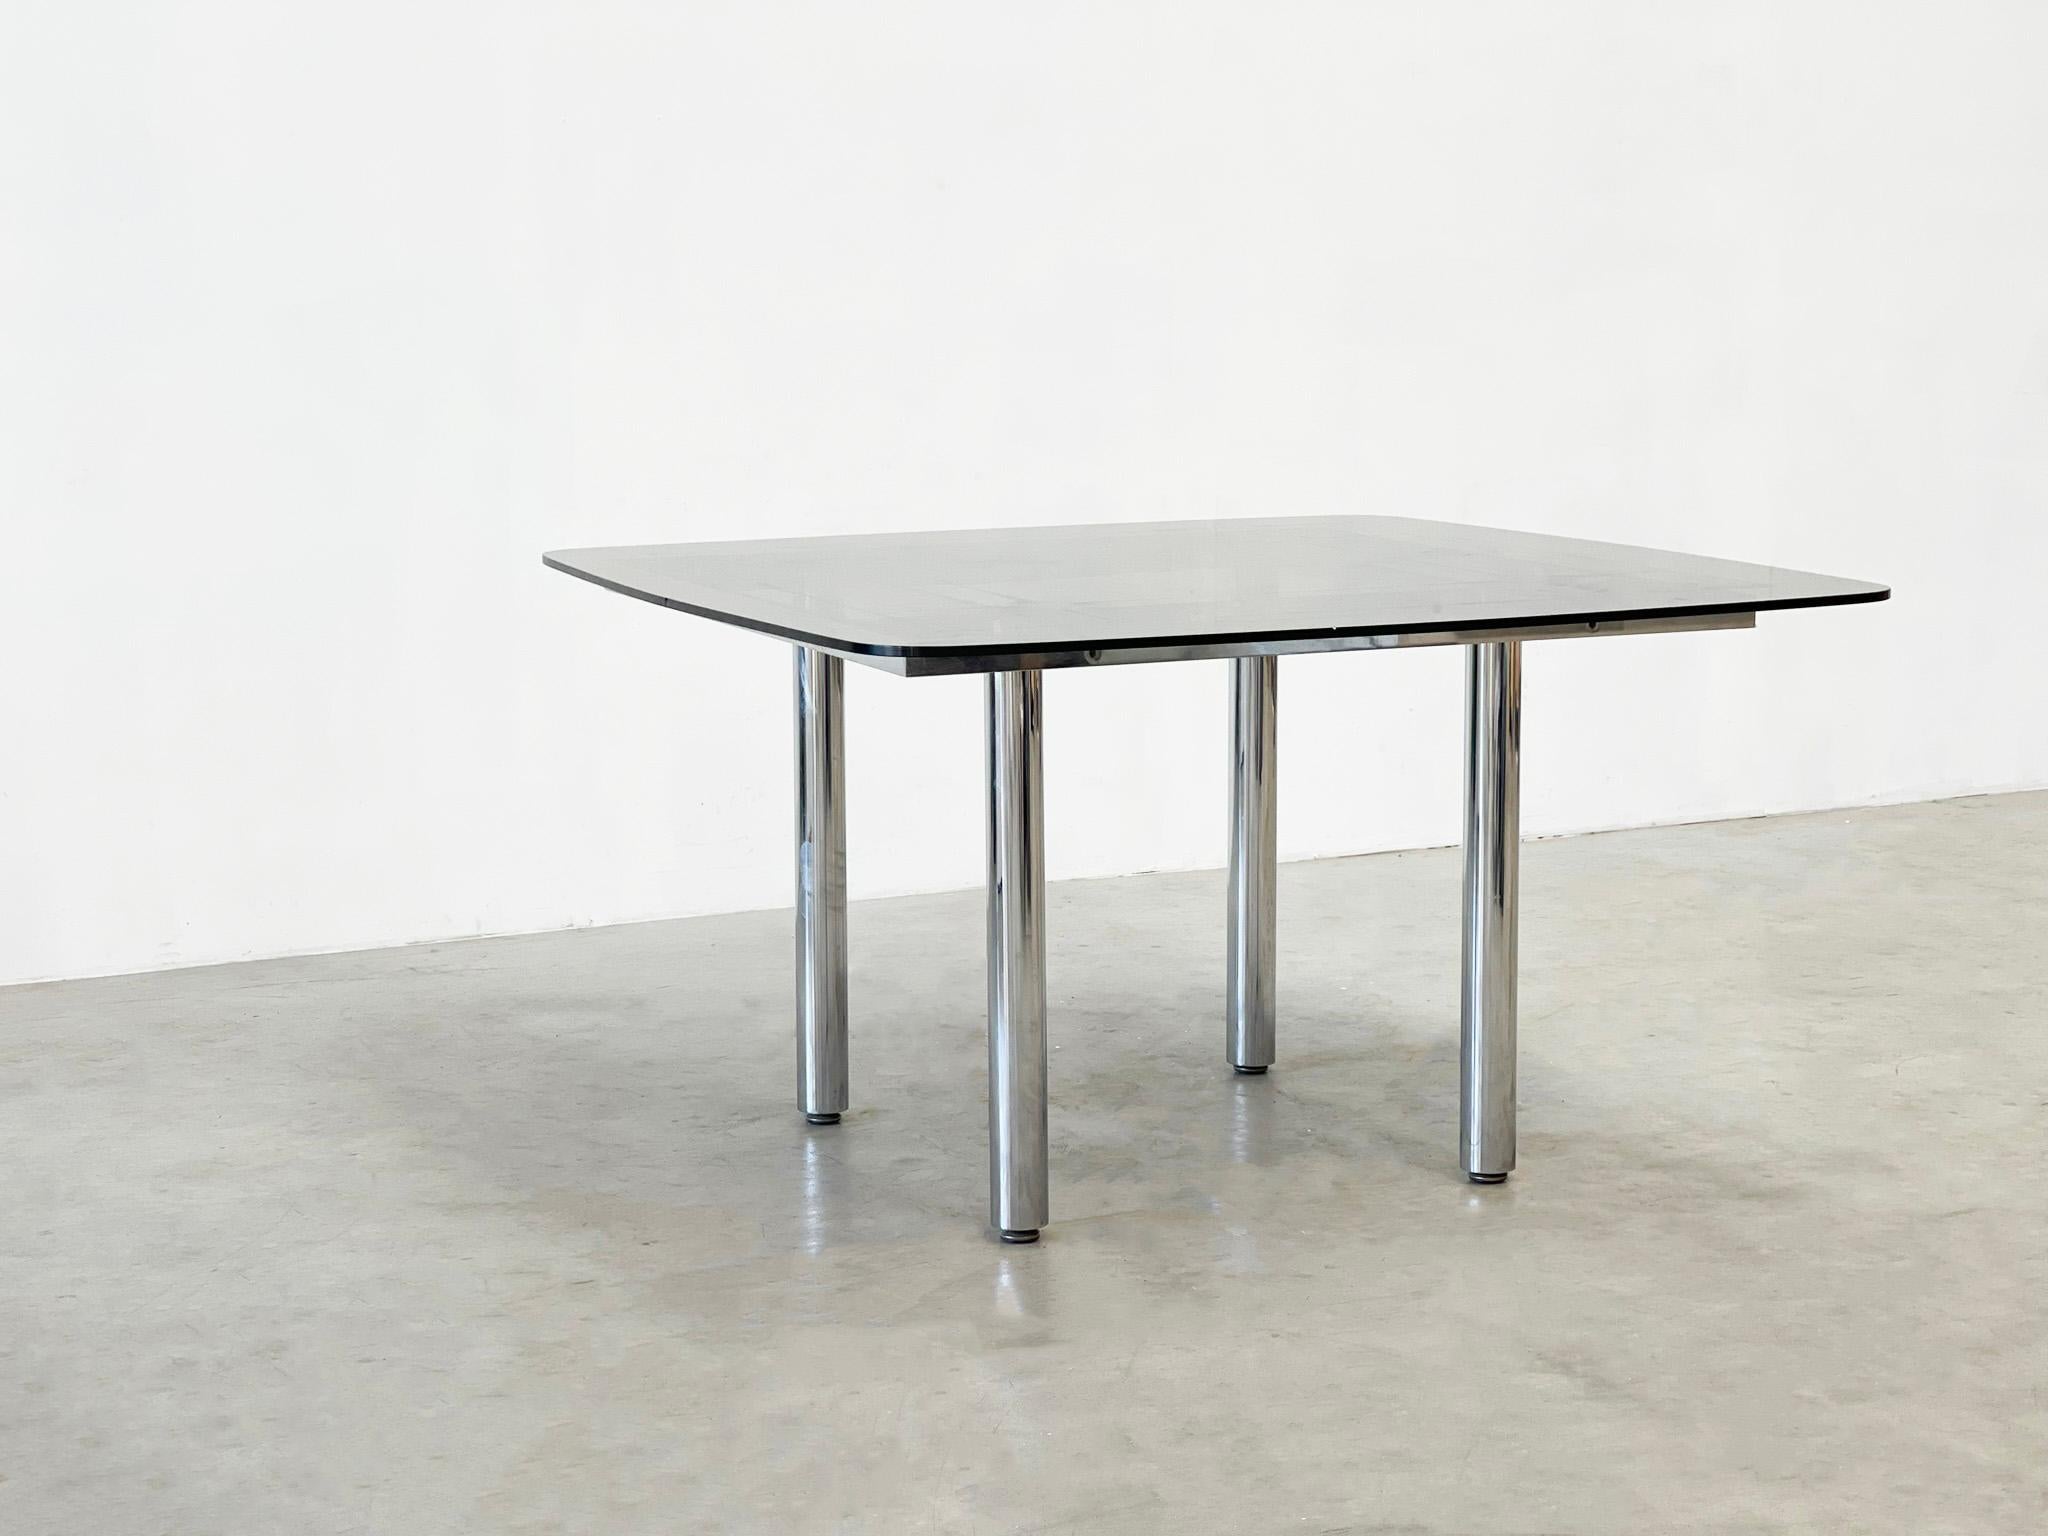 Chrome tubular dining table
Spectacular chrome dining room table. The table is from the 1970s from Italy. The maker of the table is unknown to us but it is clearly a piece of craftsmanship. It has clearly influences by Carlo Scarpa and the 